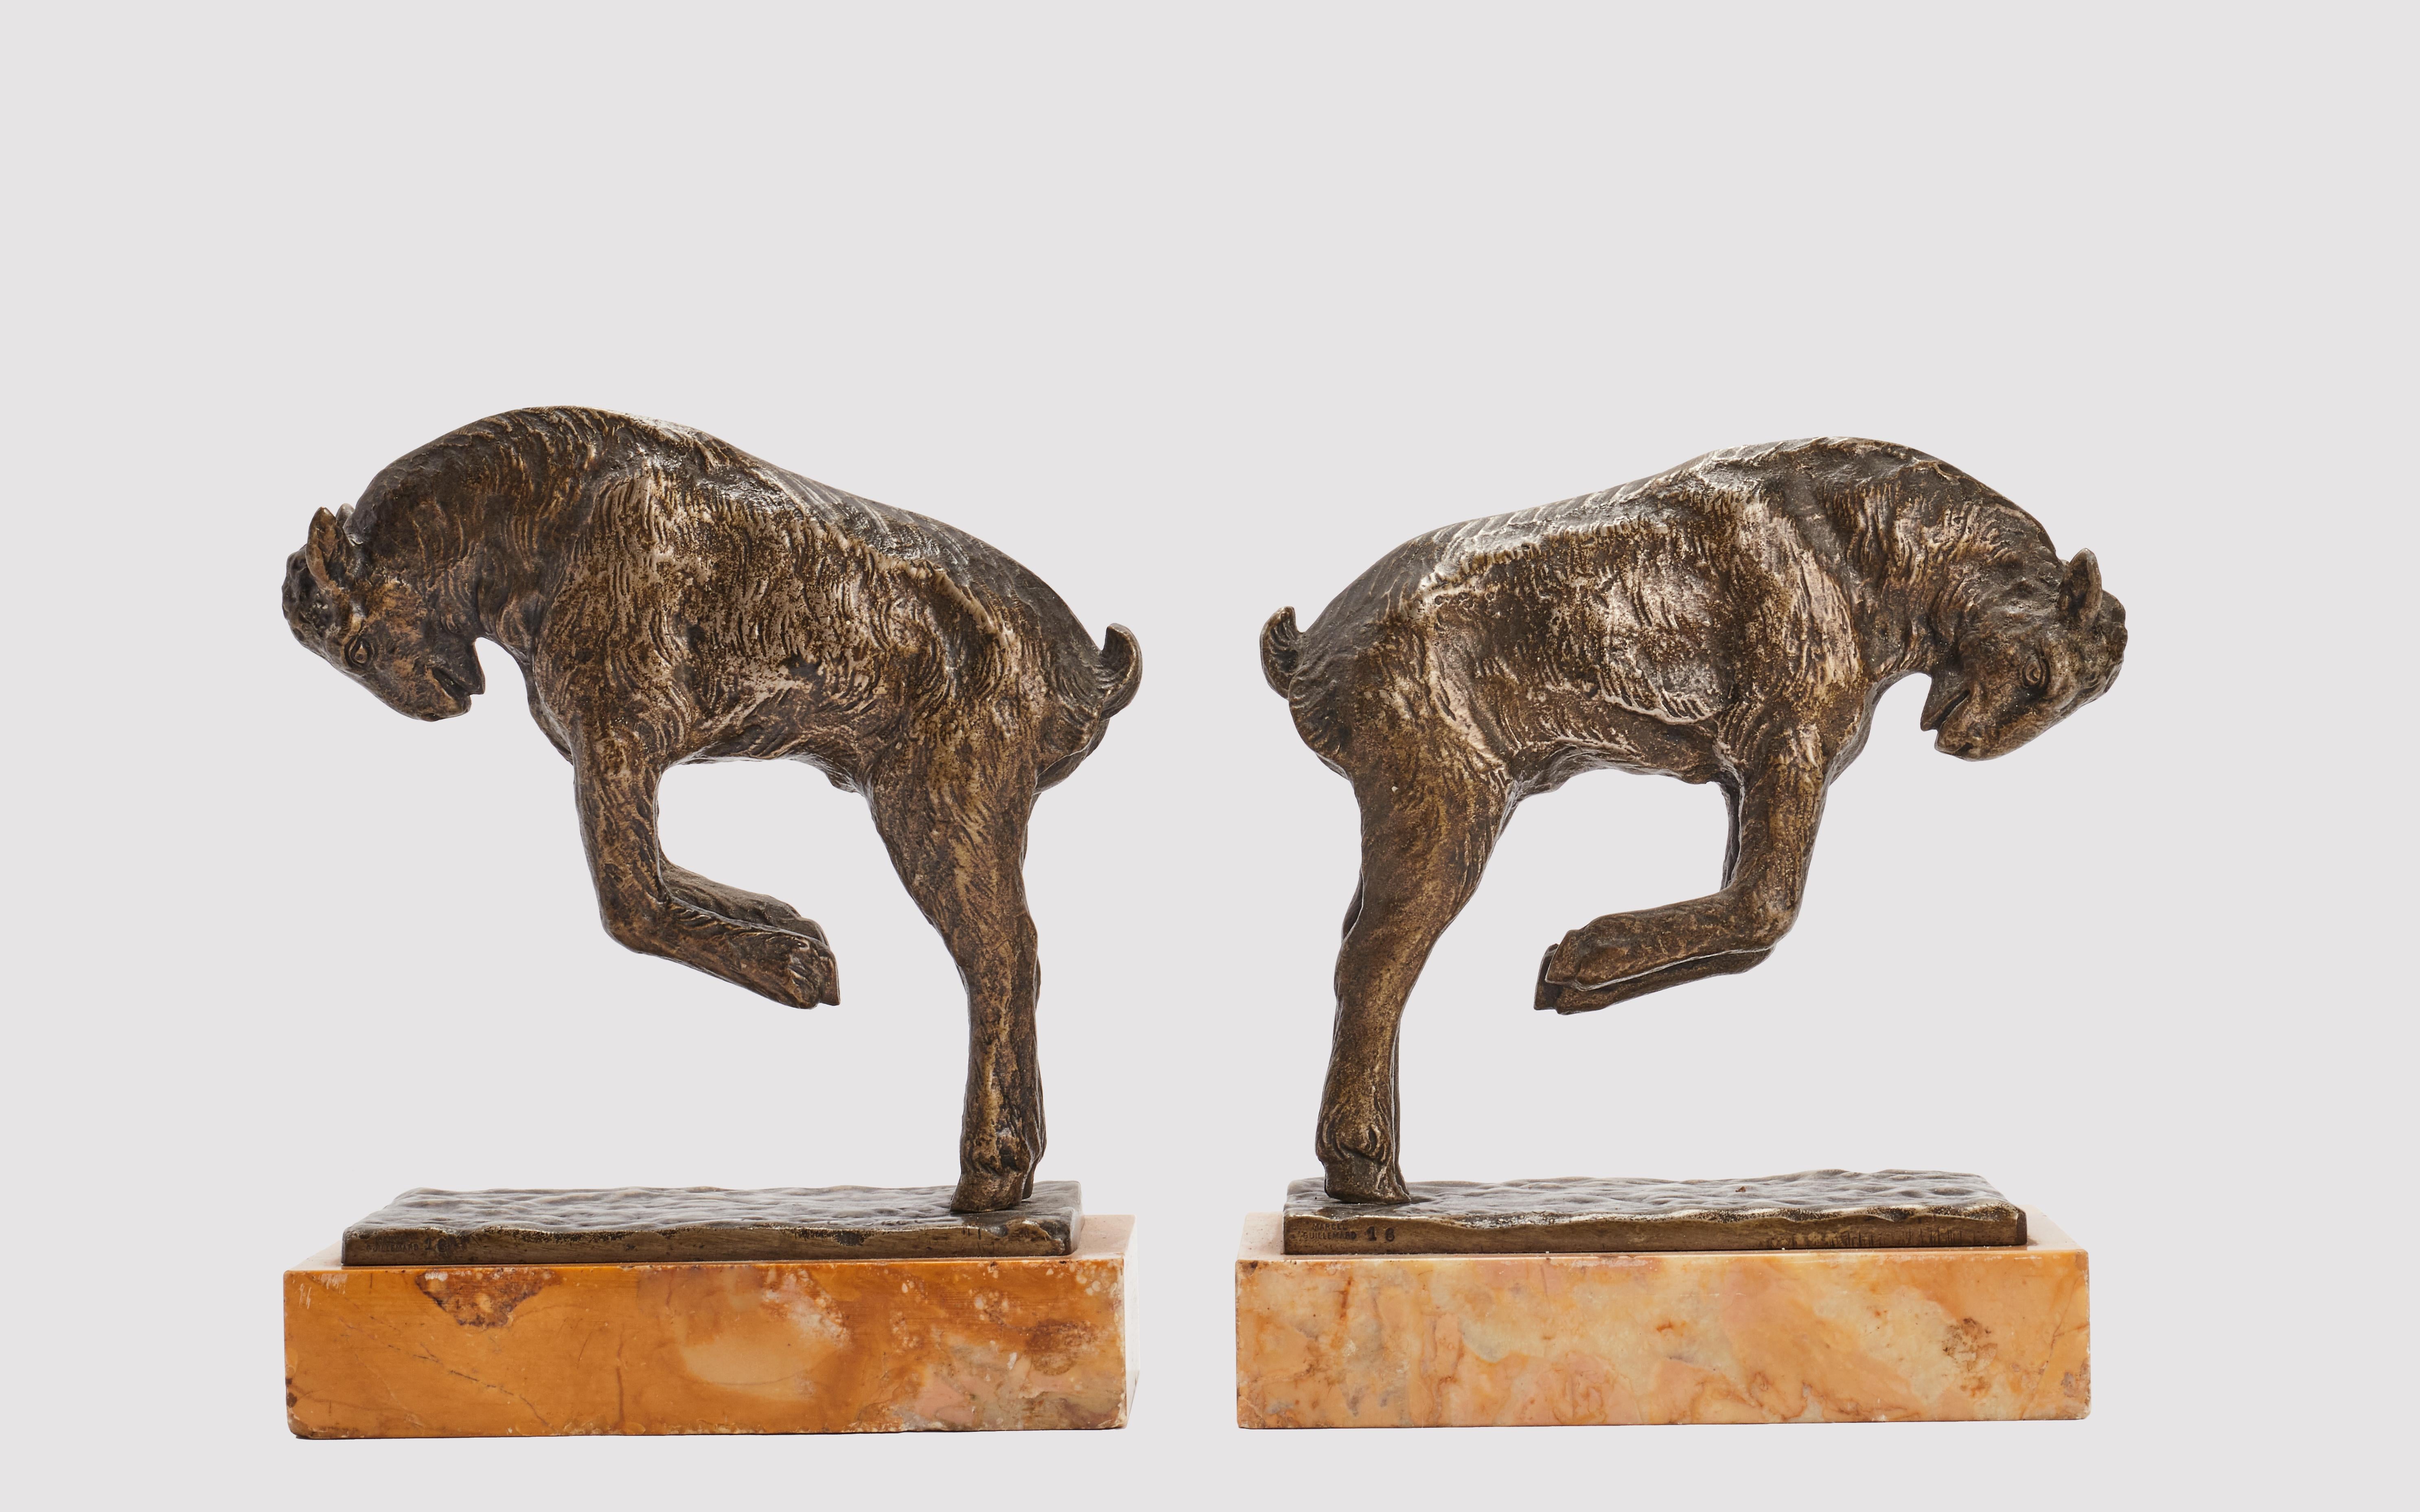 Pair of bookends in bronze, yellow Siena marble base,  representing jumping goats. Signed Pierre Laurel. France circa 1900.